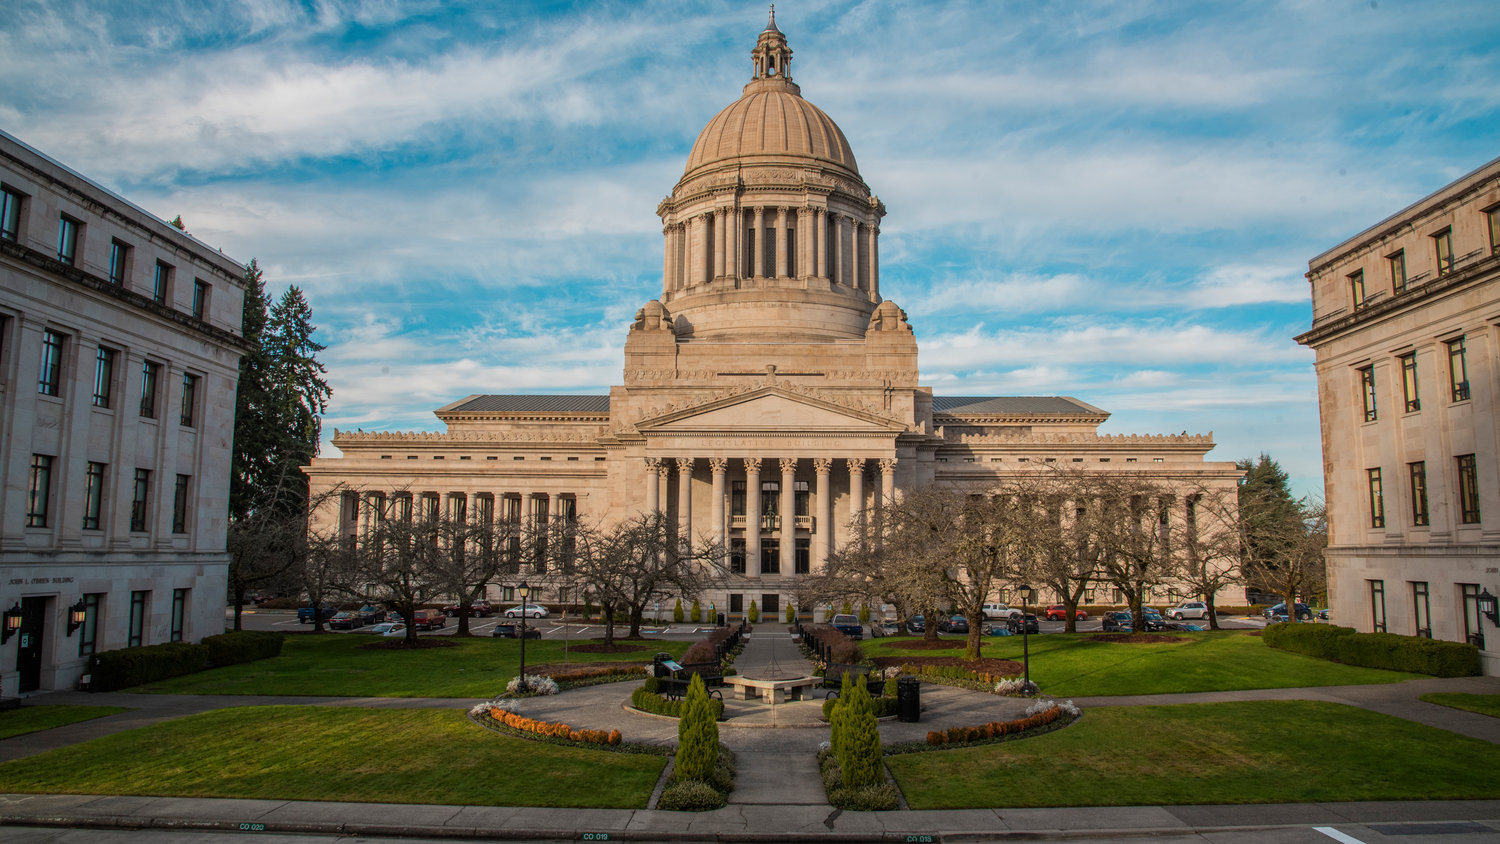 The Washington state Capitol building in Olympia is pictured in this file photo.